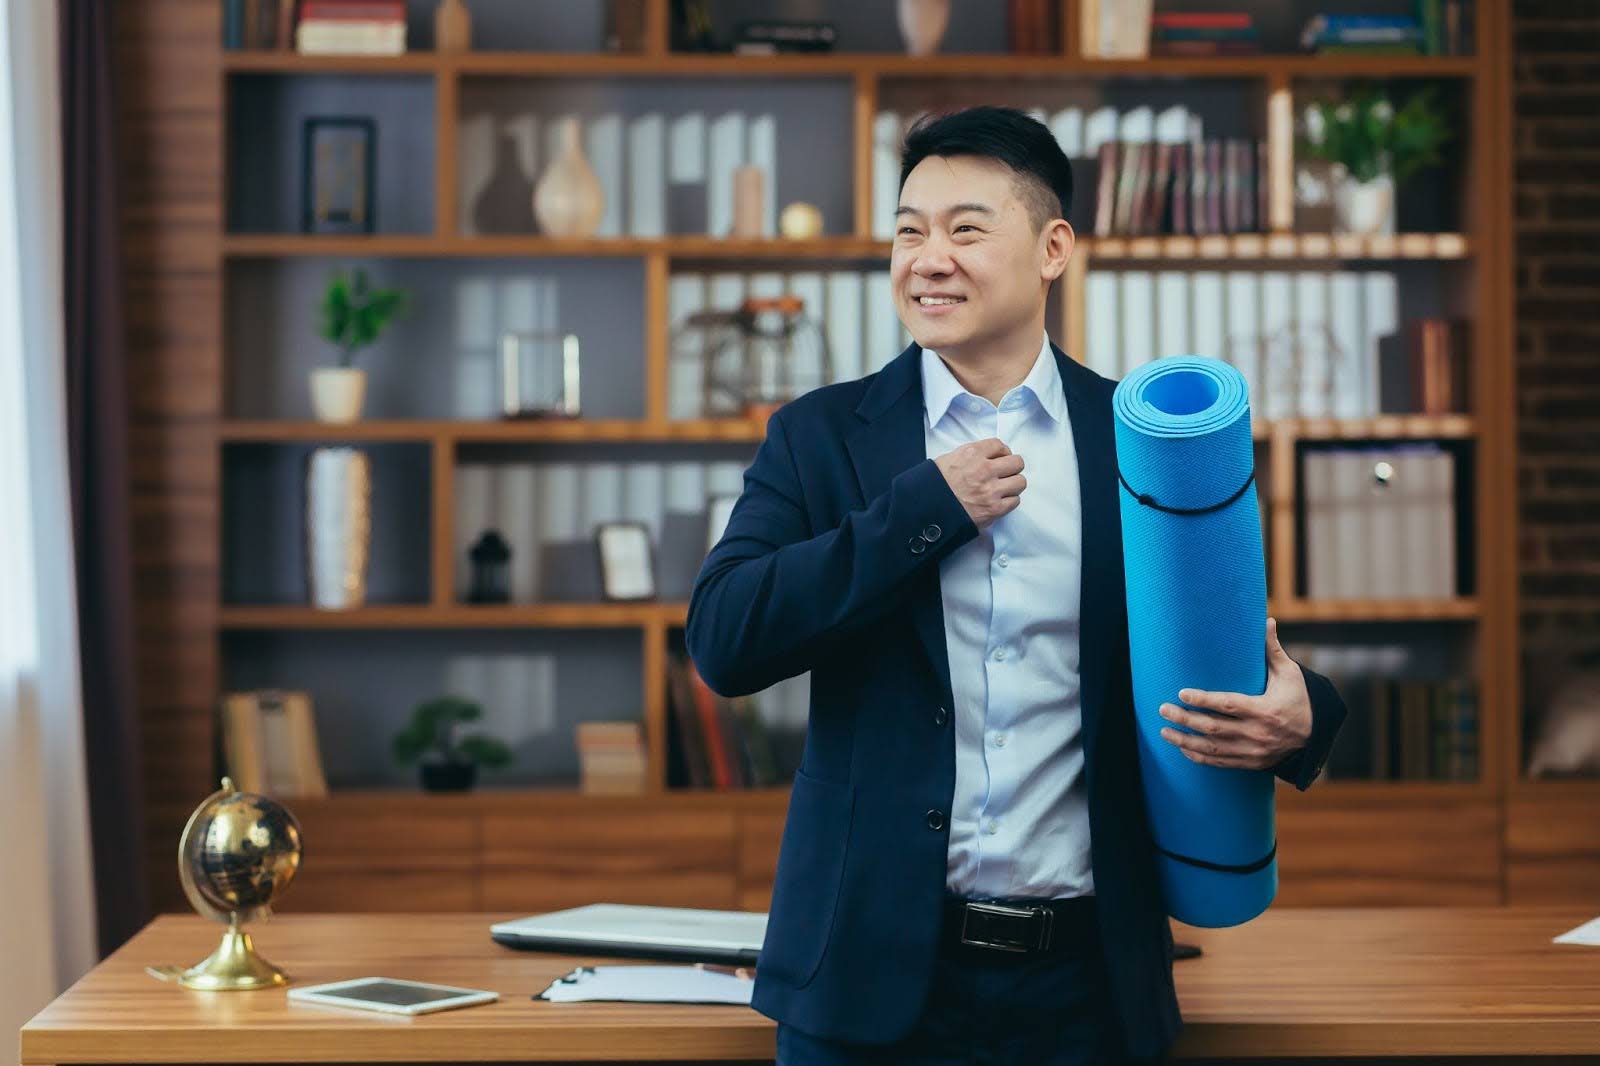 Fit businessman holding a yoga mat in his office